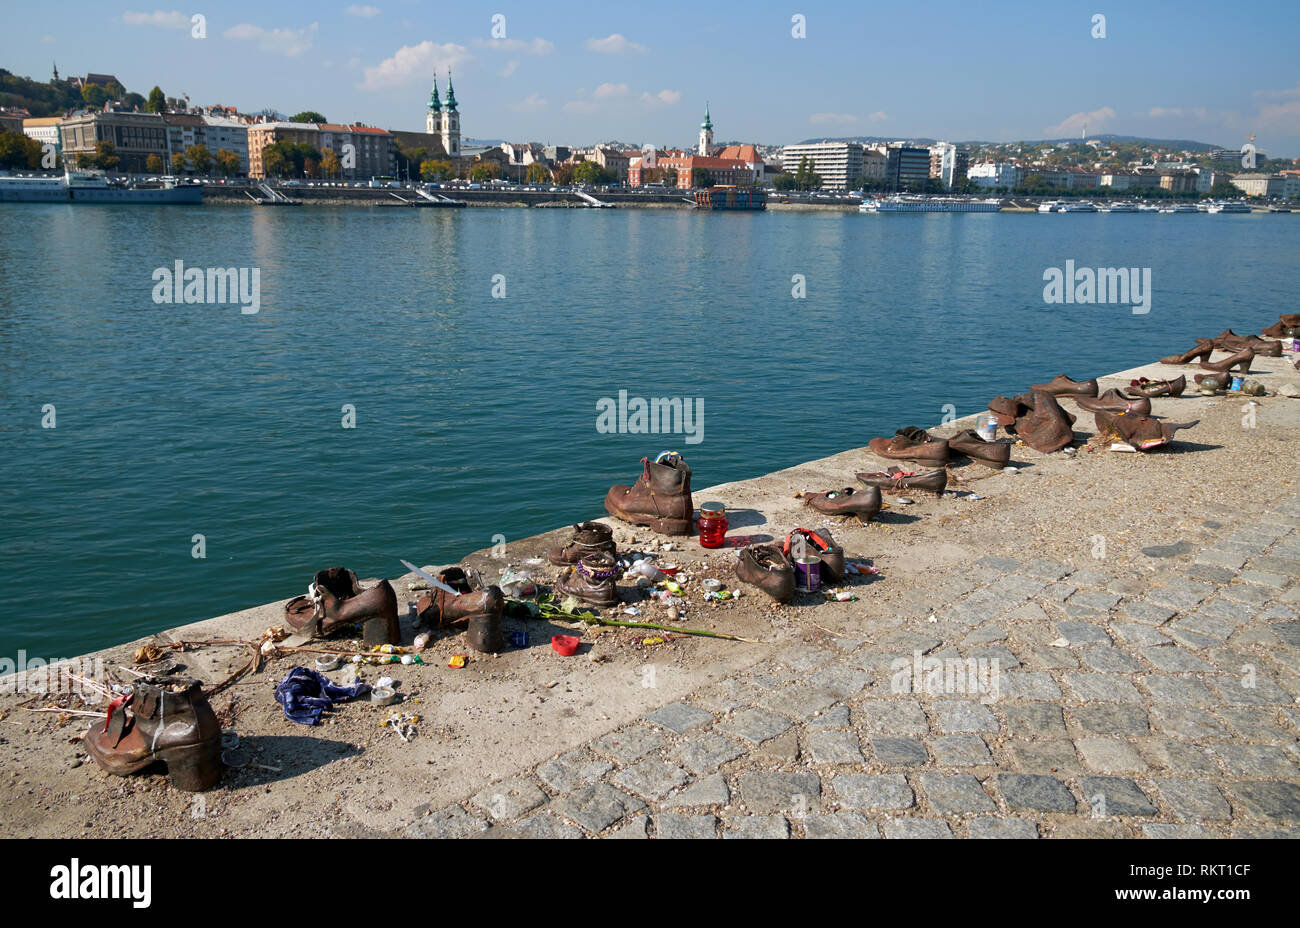 The 'Shoes on the Danube Bank', Budapest, Hungary. The trail of iron shoes is a memorial to Hungarian Jews shot here by Arrow Cross militiamen in WW2. Stock Photo